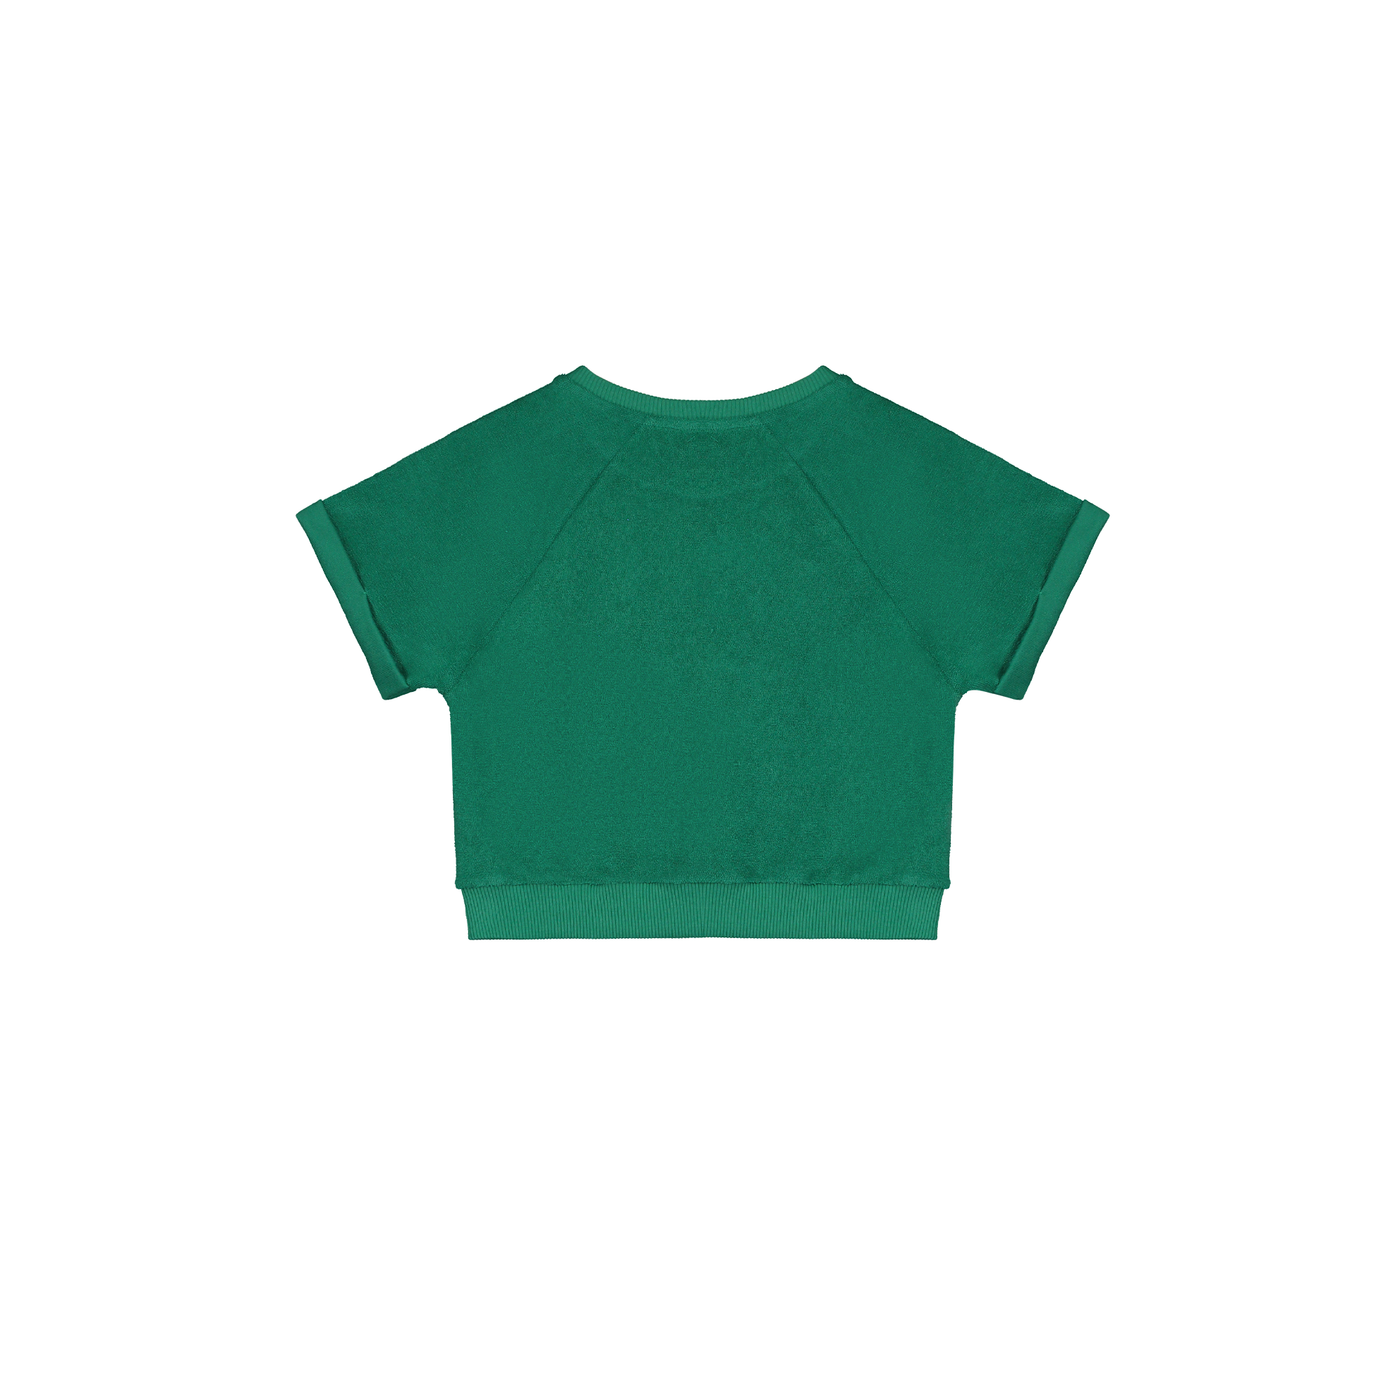 LETTER TO THE WORLD - Amsterdam Shortsleeve Grass Sweater - Le CirQue Kidsconceptstore 